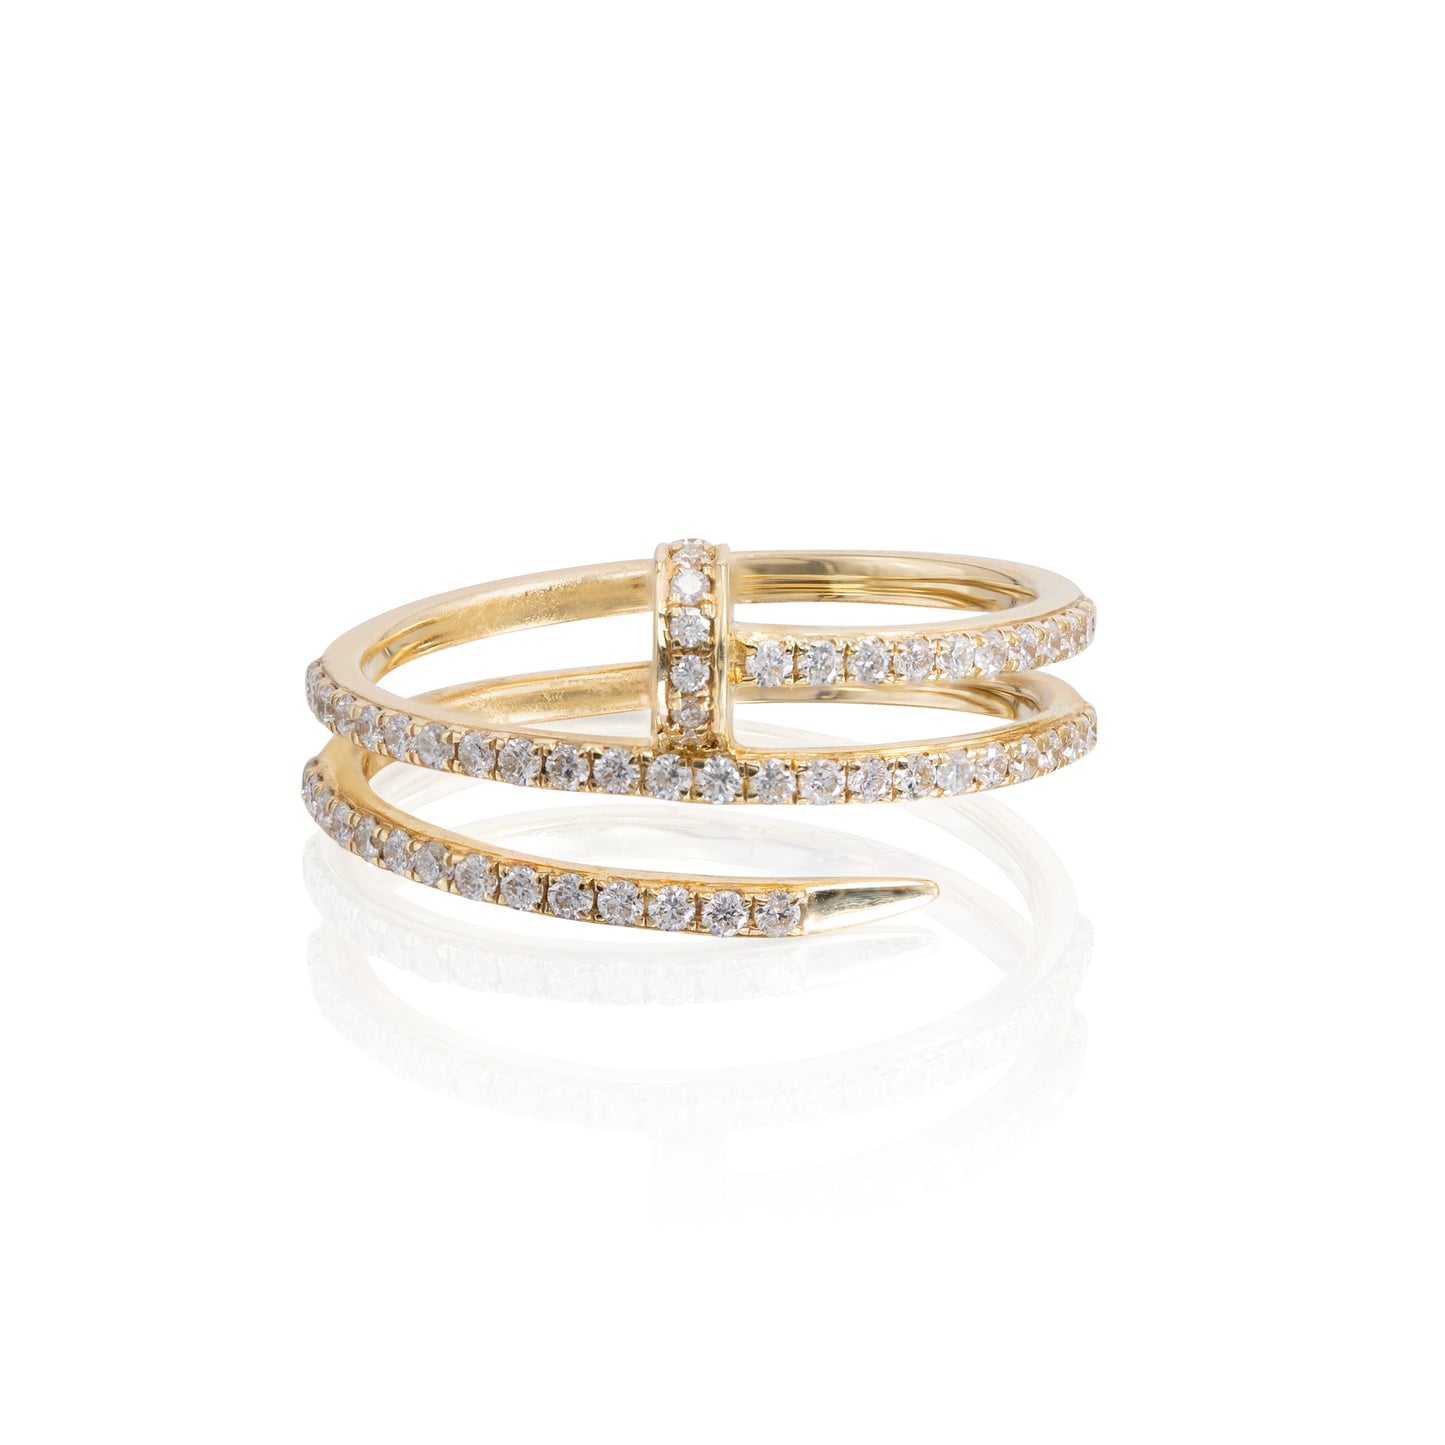 14K GOLD AND DIAMOND COIL RING